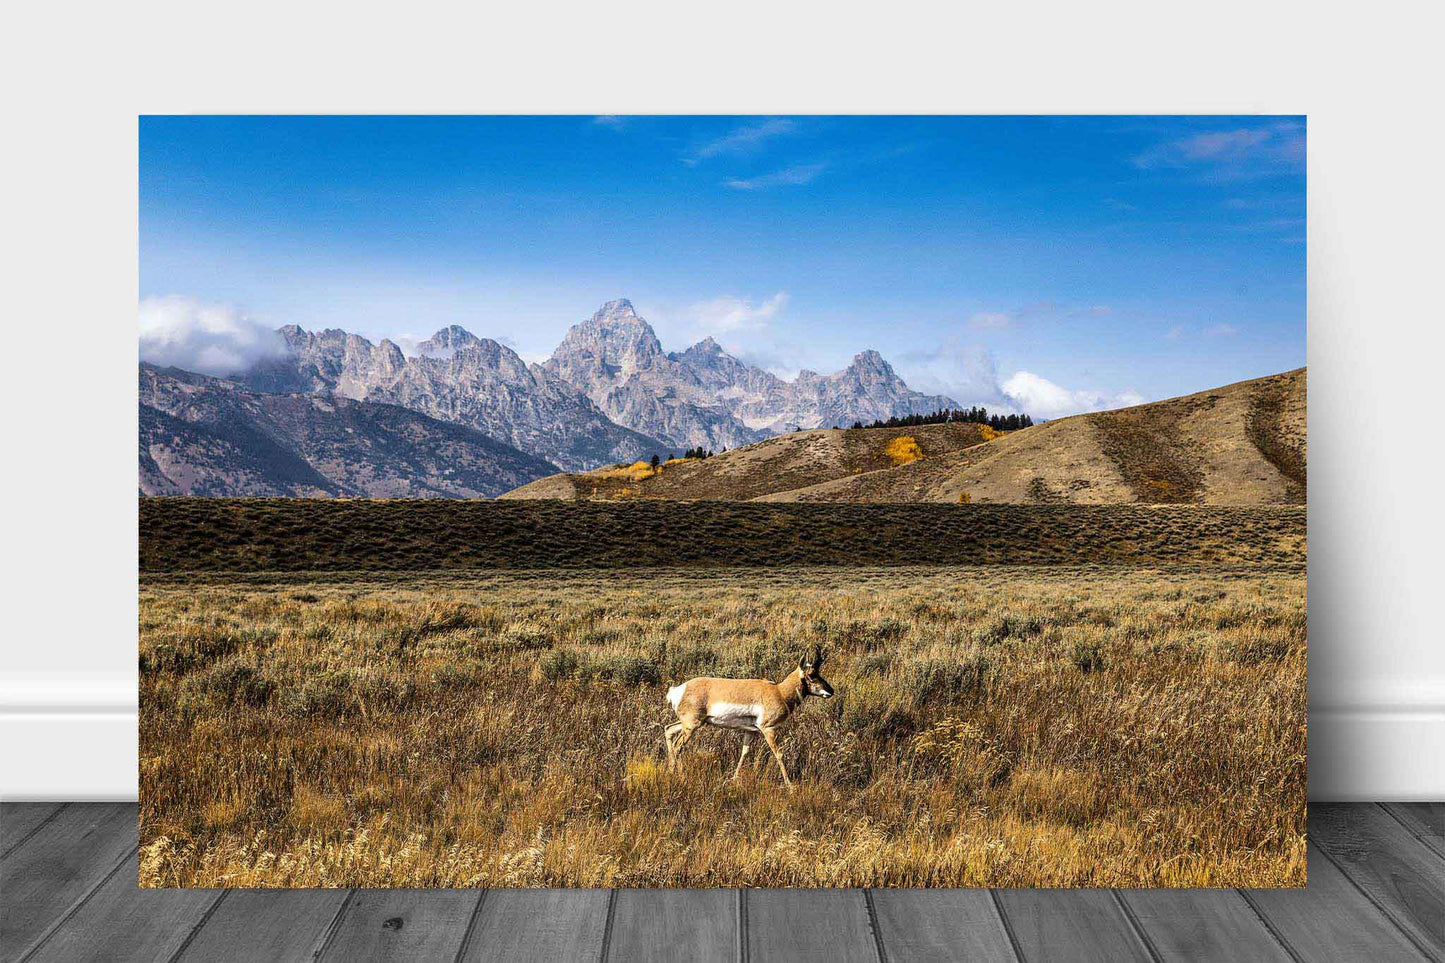 Wildlife metal print of a pronghorn antelope taking a stroll in Grand Teton National Park, Wyoming by Sean Ramsey of Southern Plains Photography.